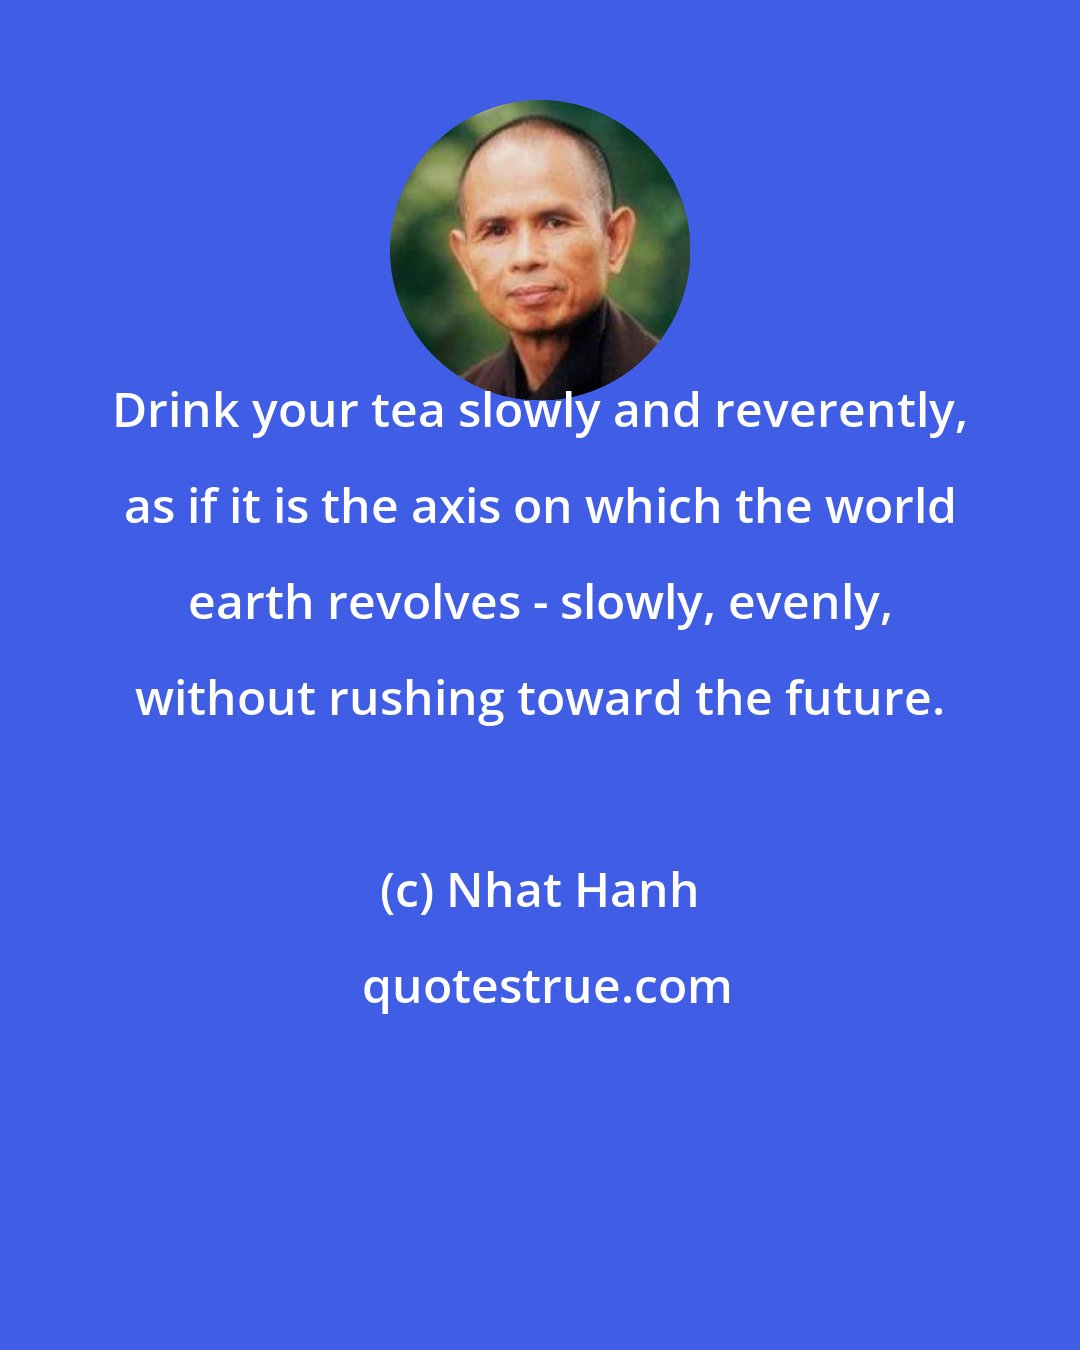 Nhat Hanh: Drink your tea slowly and reverently, as if it is the axis on which the world earth revolves - slowly, evenly, without rushing toward the future.